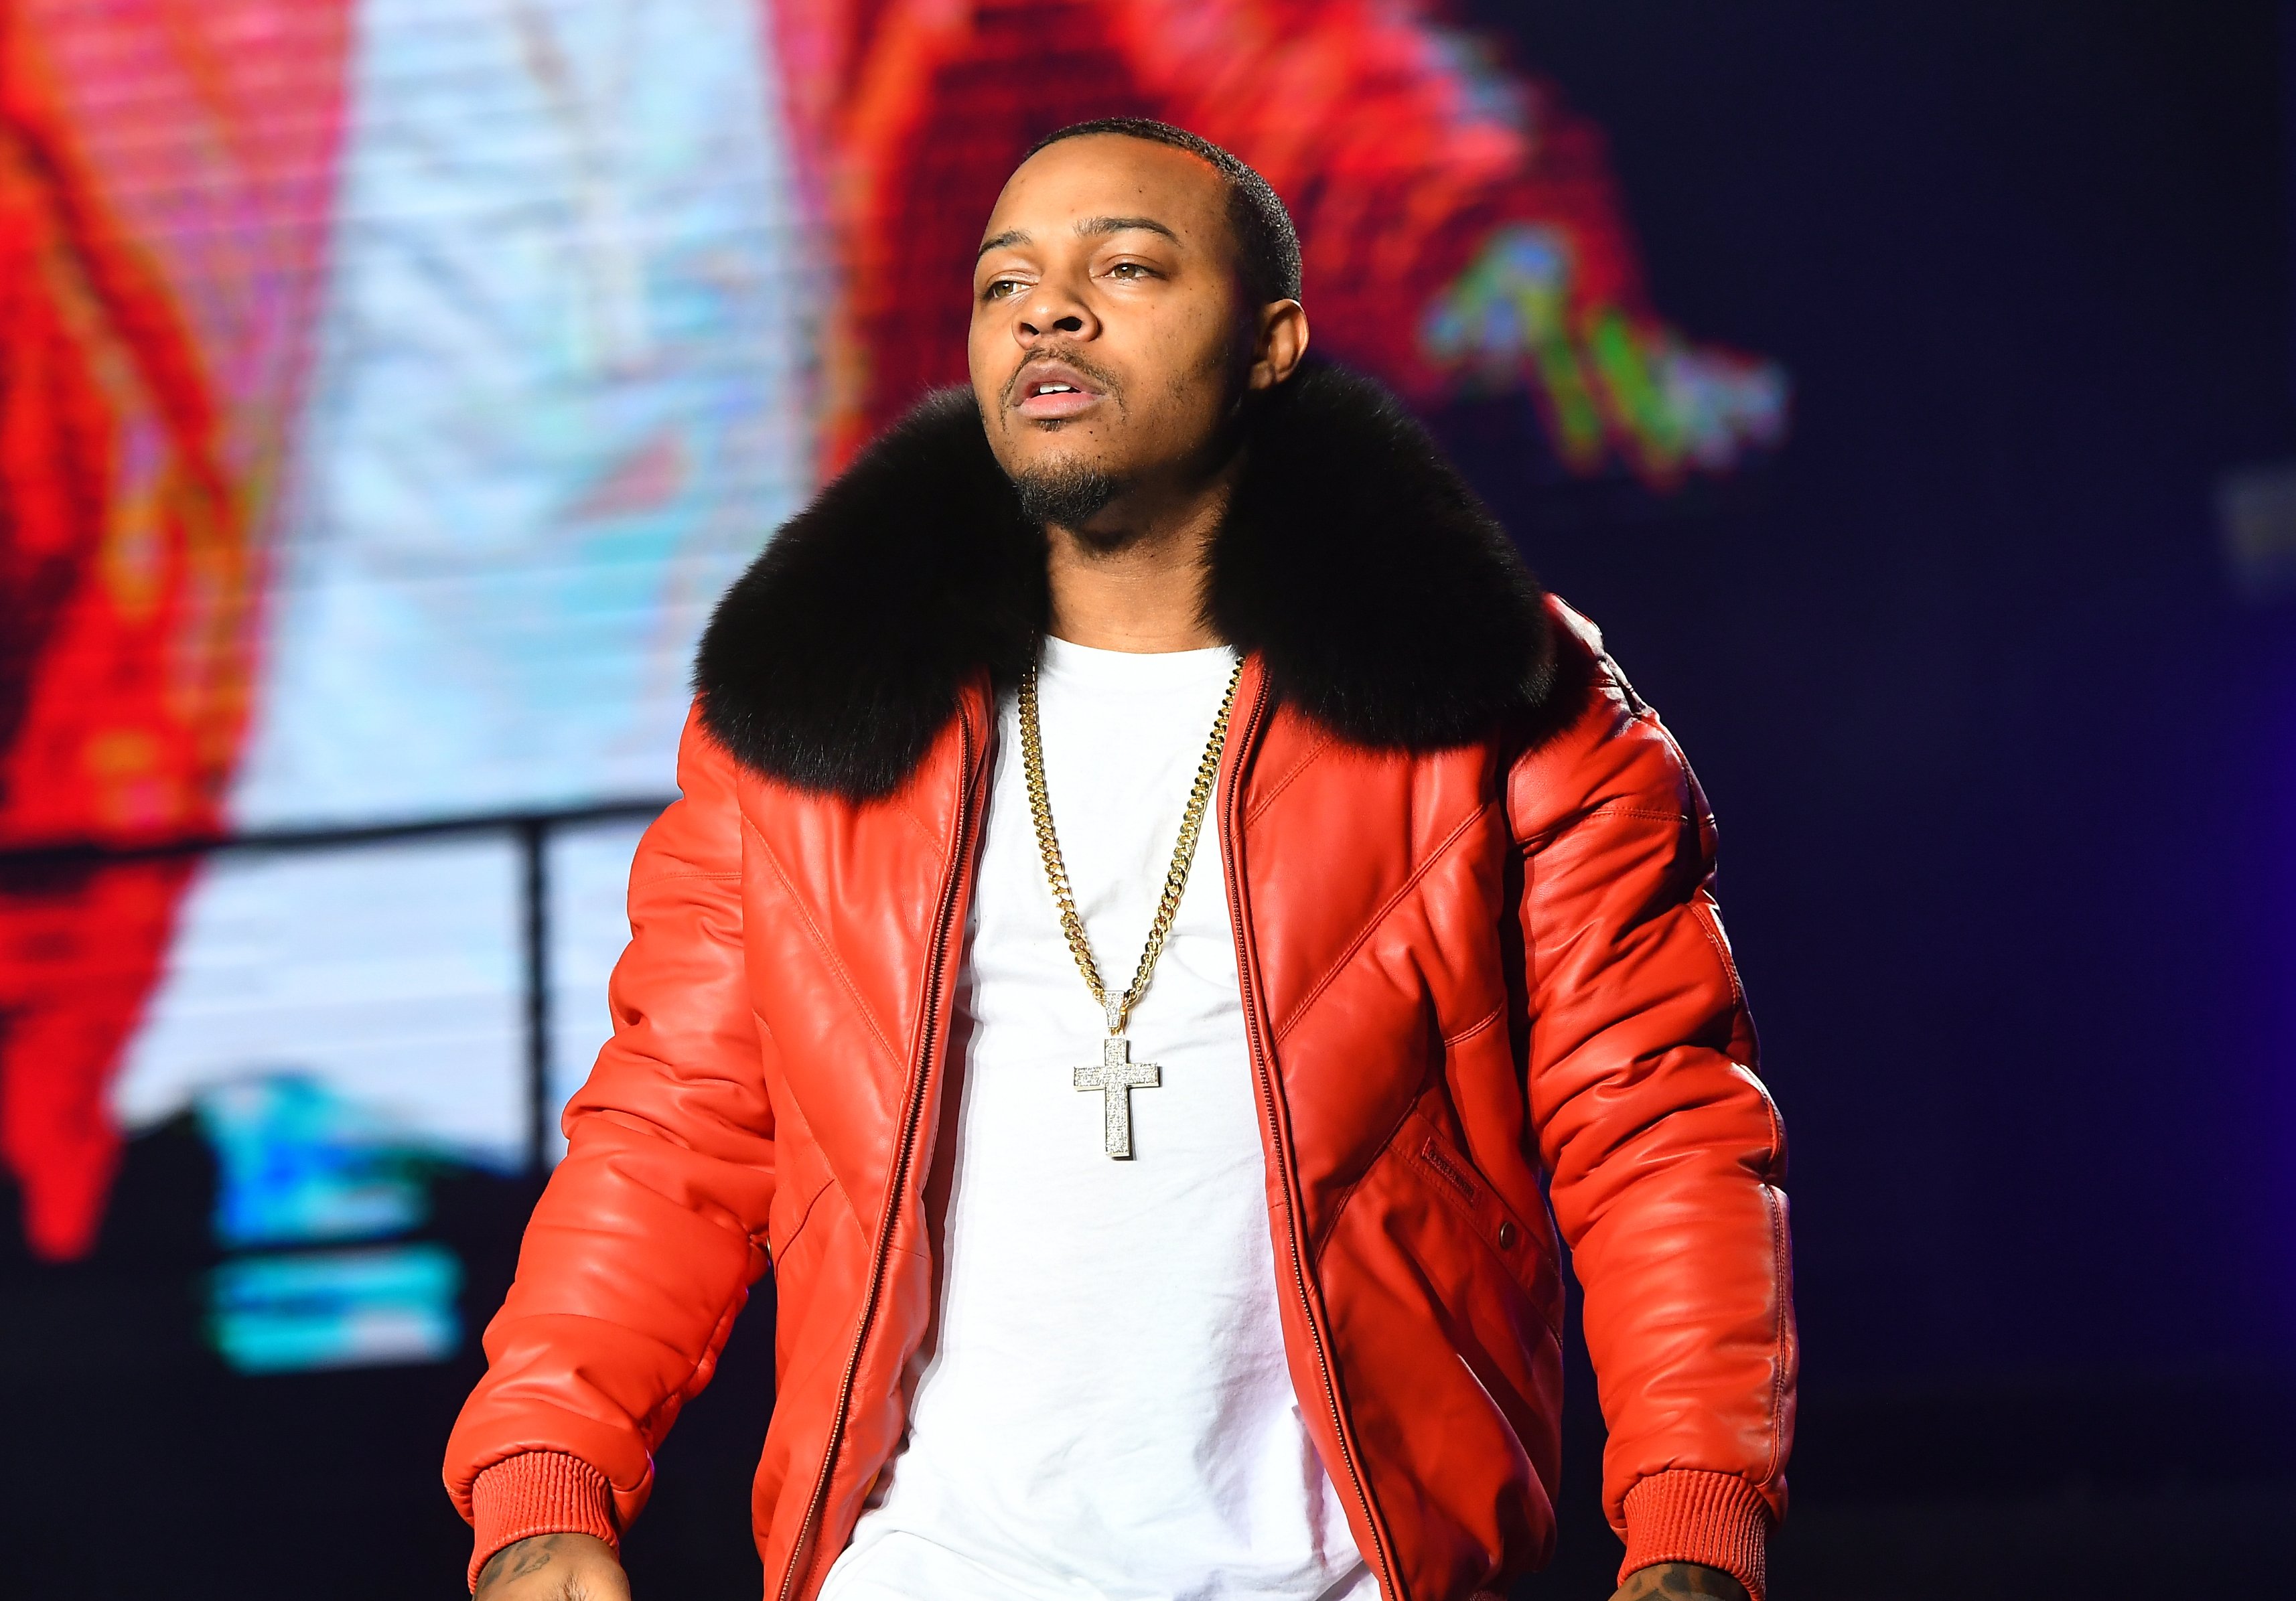 Shad "Bow Wow" Moss pictured during B2K's Millennium Tour at State Farm Arena on April 05, 2019 in Atlanta, Georgia. | Source: Getty Images